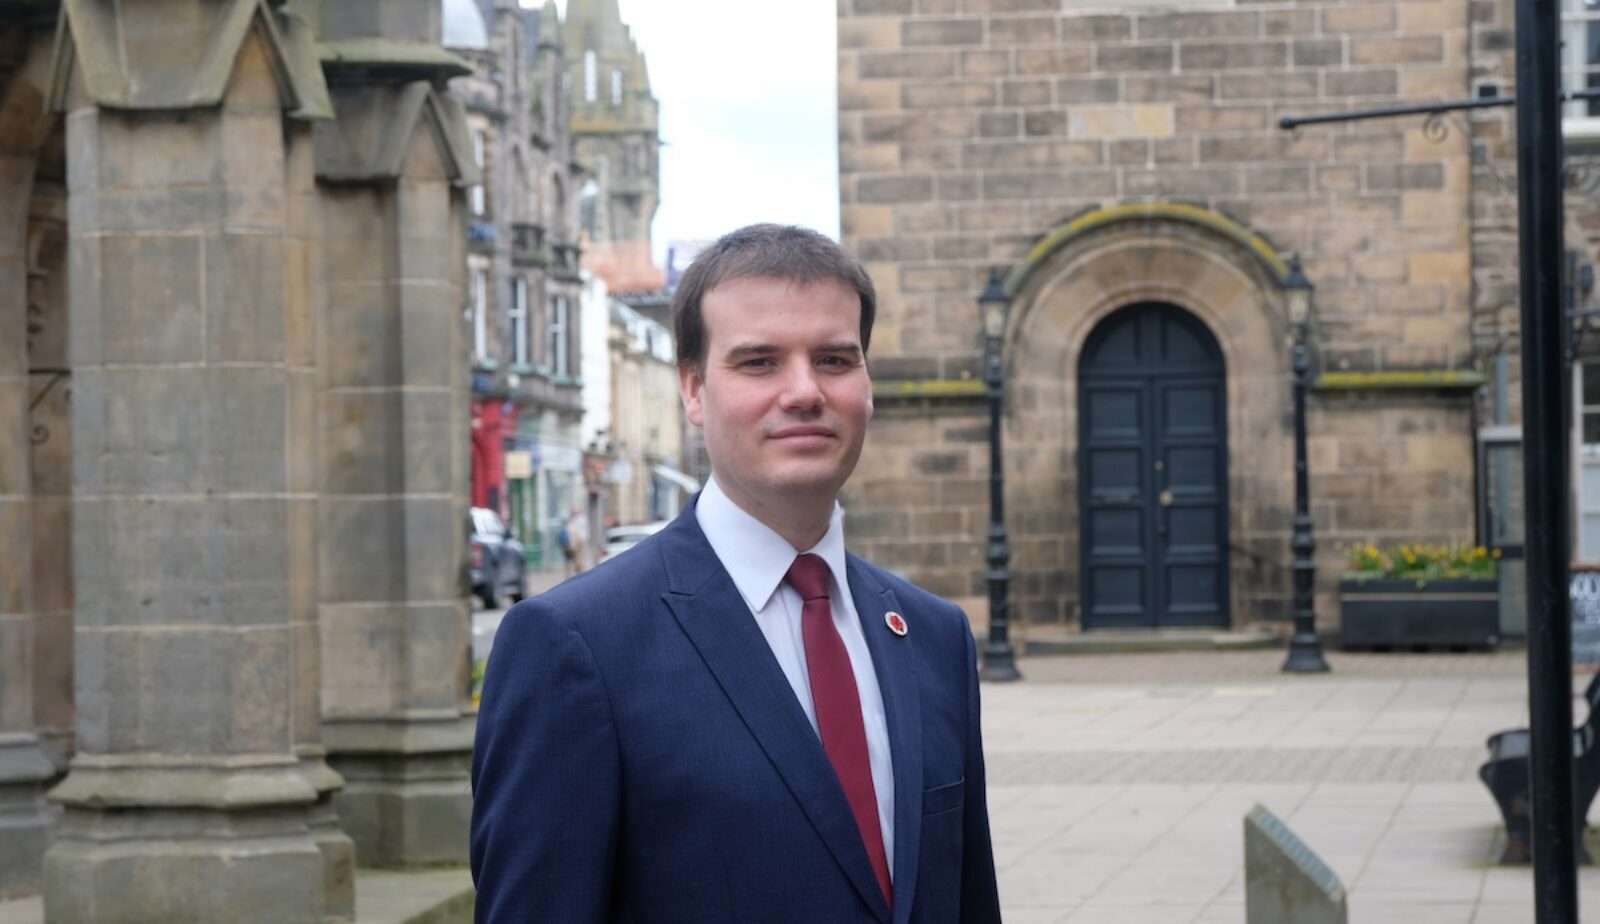 James Hynam, Labour candidate for Moray West, Nairn, and Strathspey